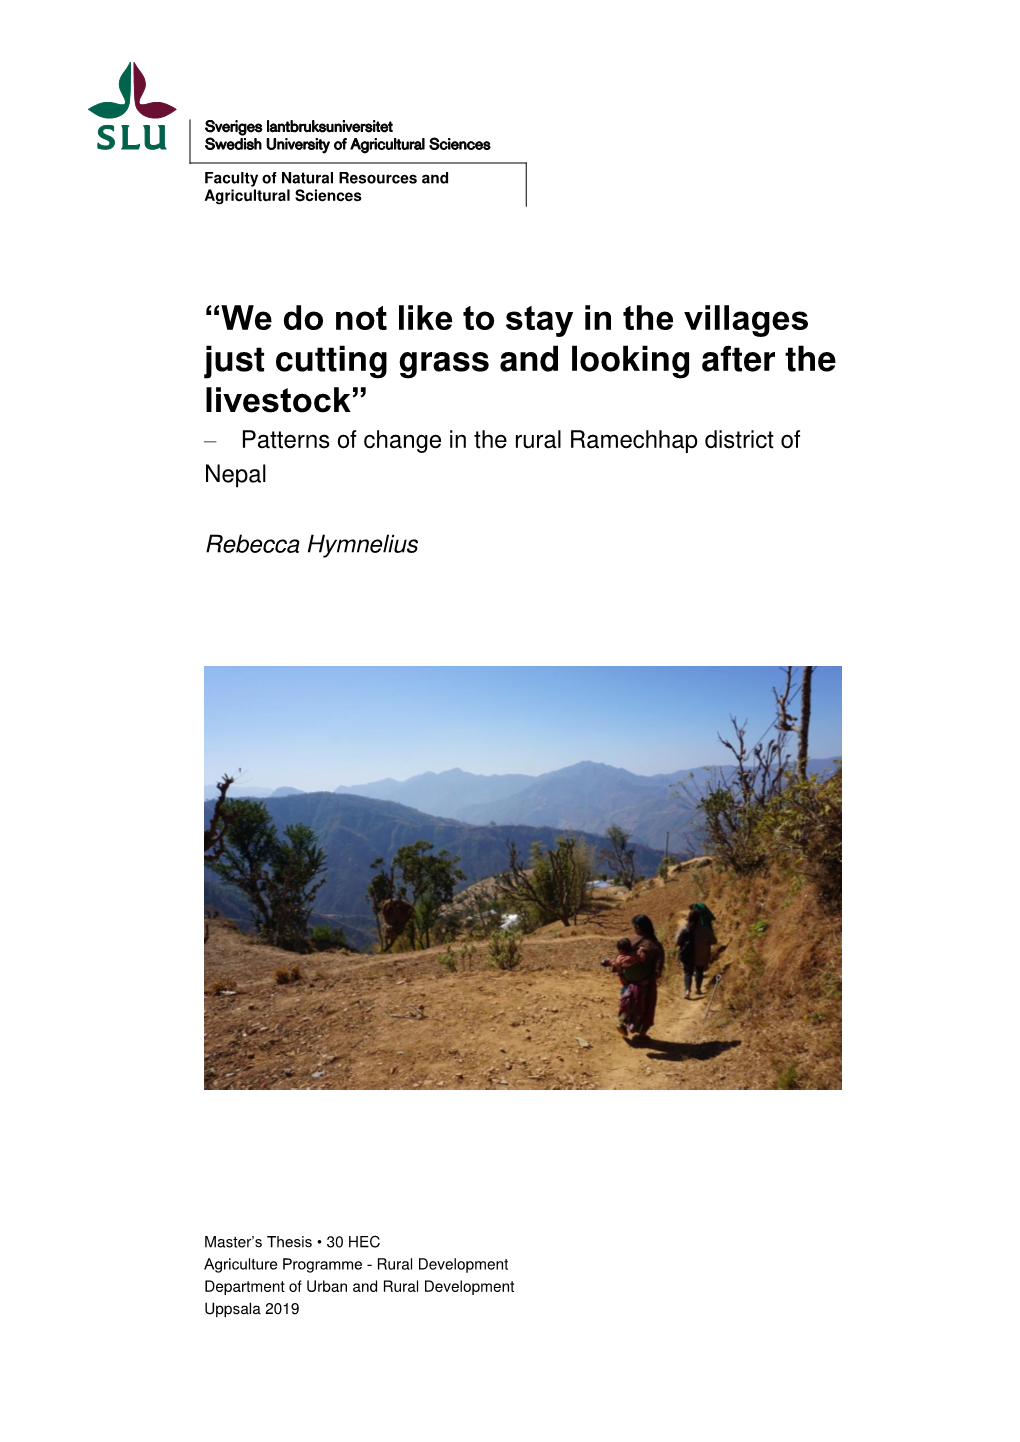 We Do Not Like to Stay in the Villages Just Cutting Grass and Looking After the Livestock” – Patterns of Change in the Rural Ramechhap District of Nepal